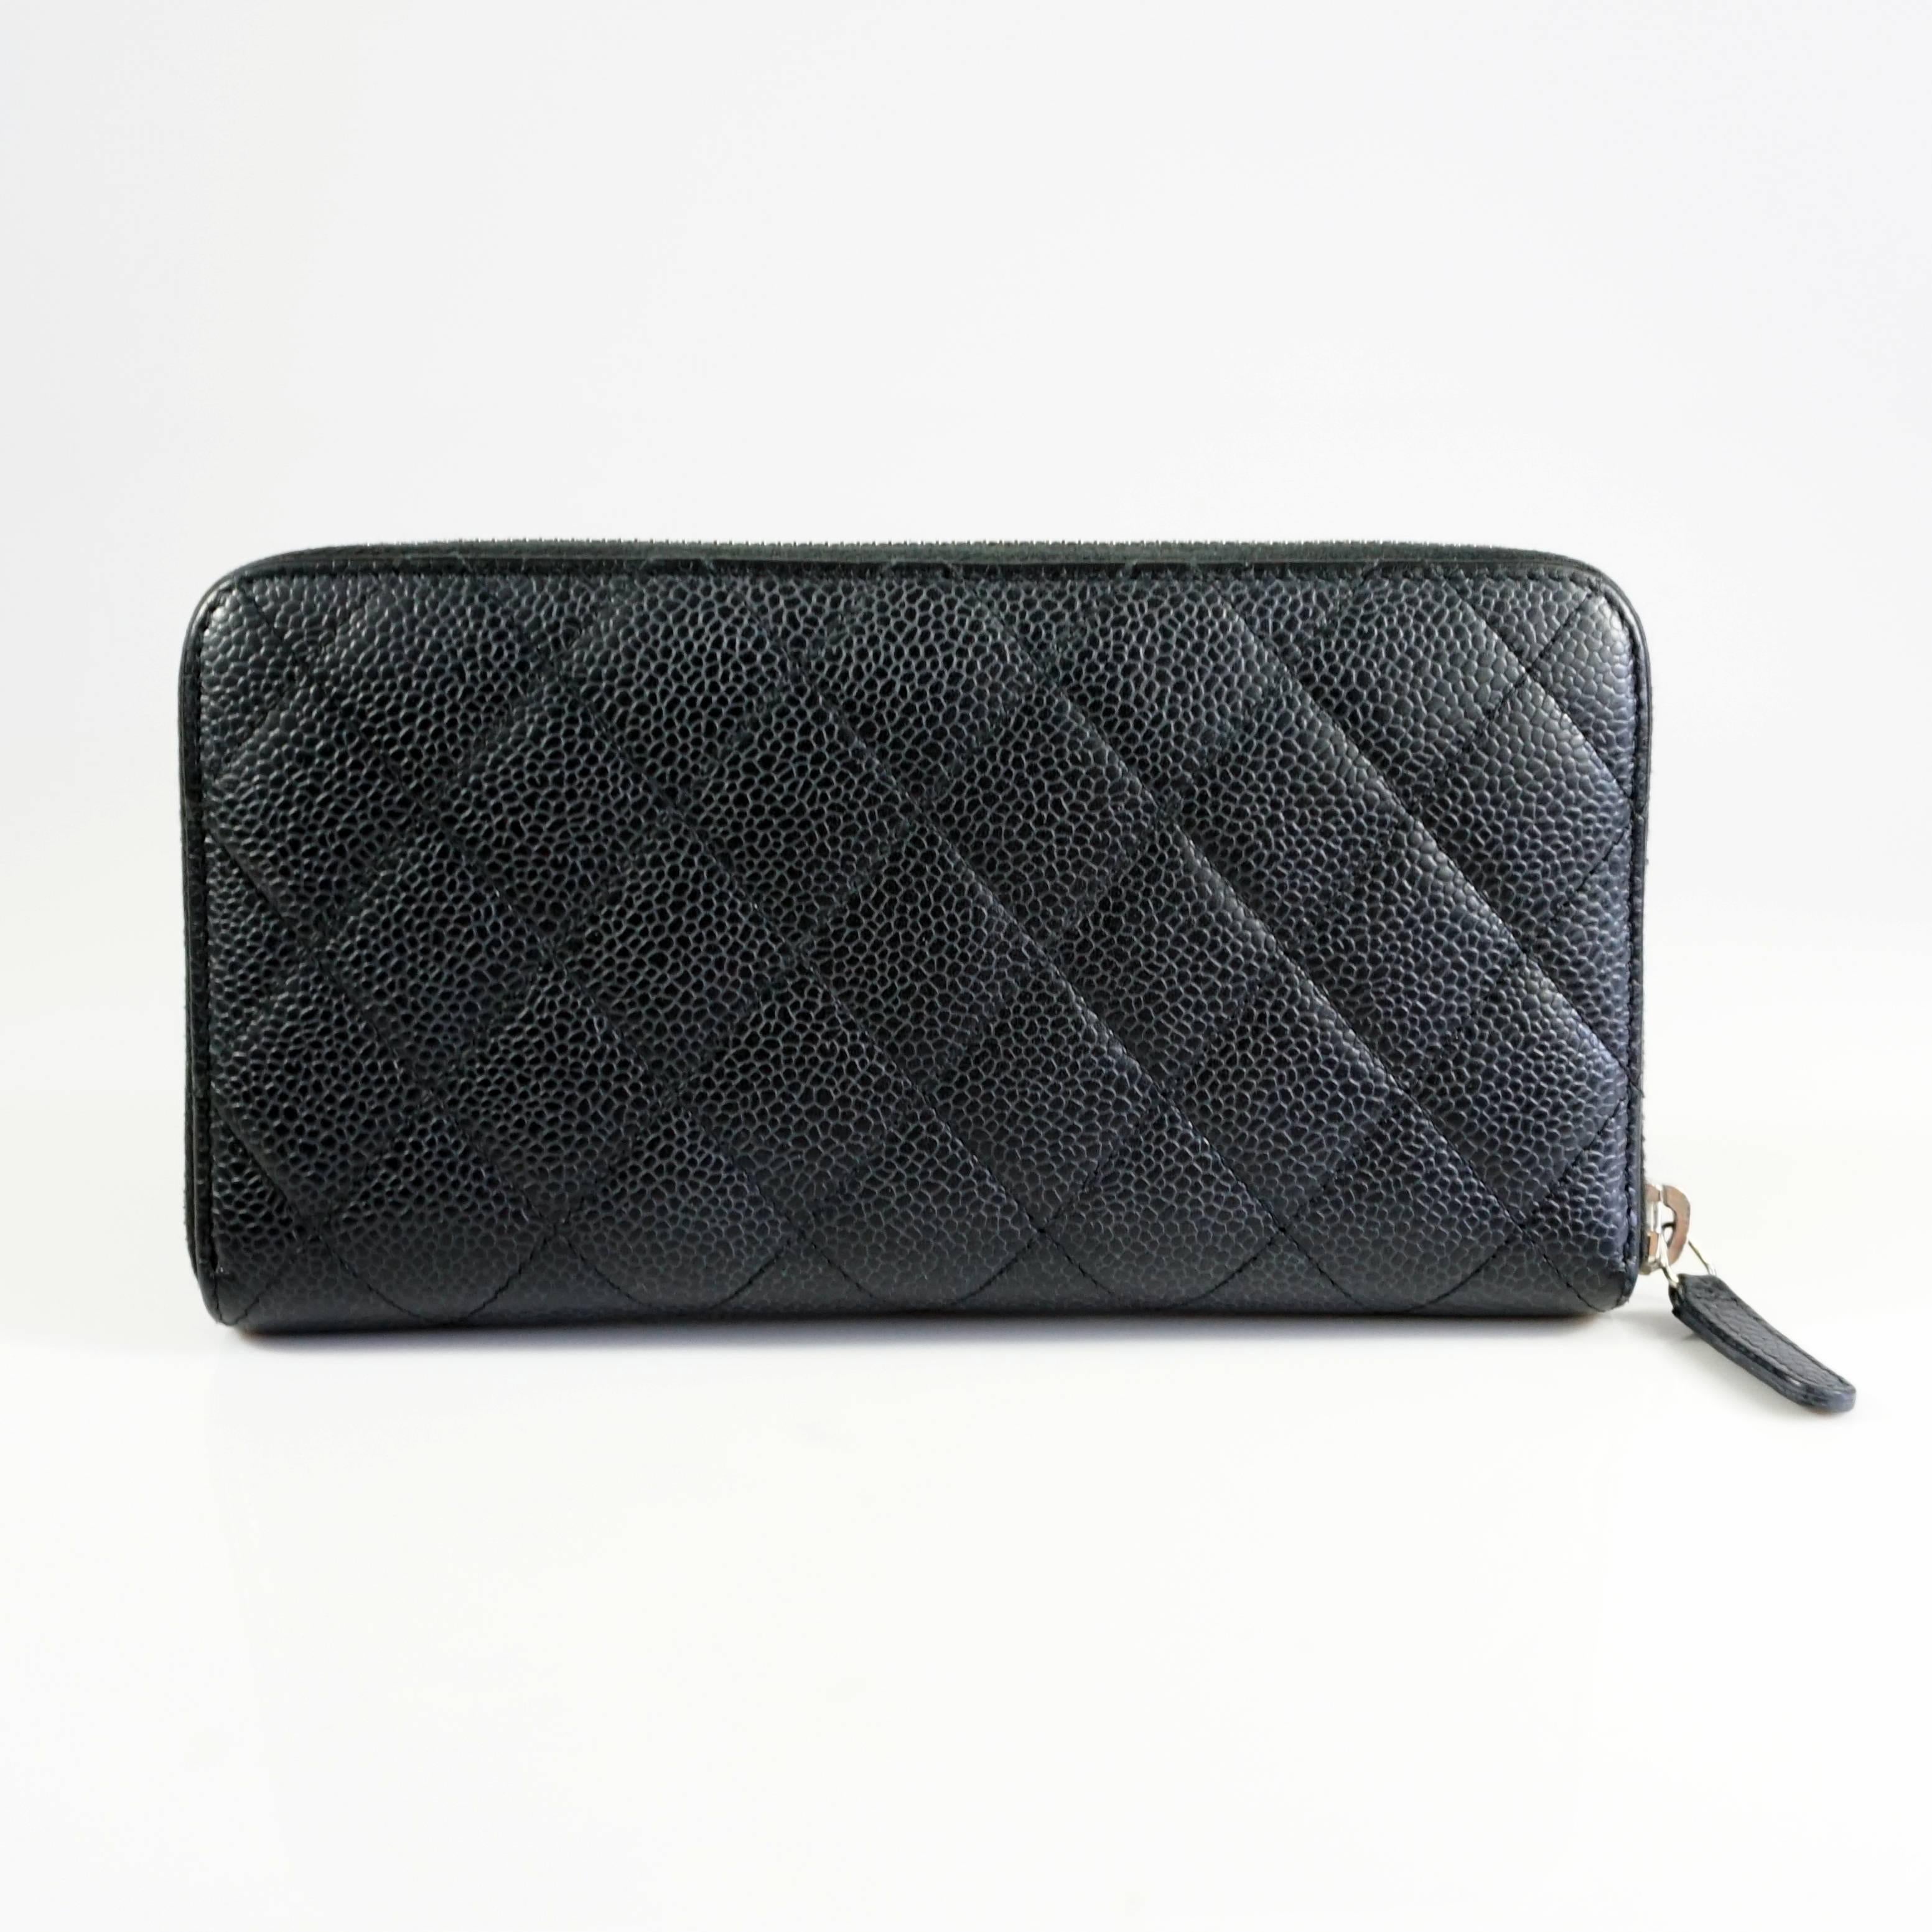 This classic Chanel wallet is black and is made of quilted caviar leather. The wallet has silver hardware and features a 